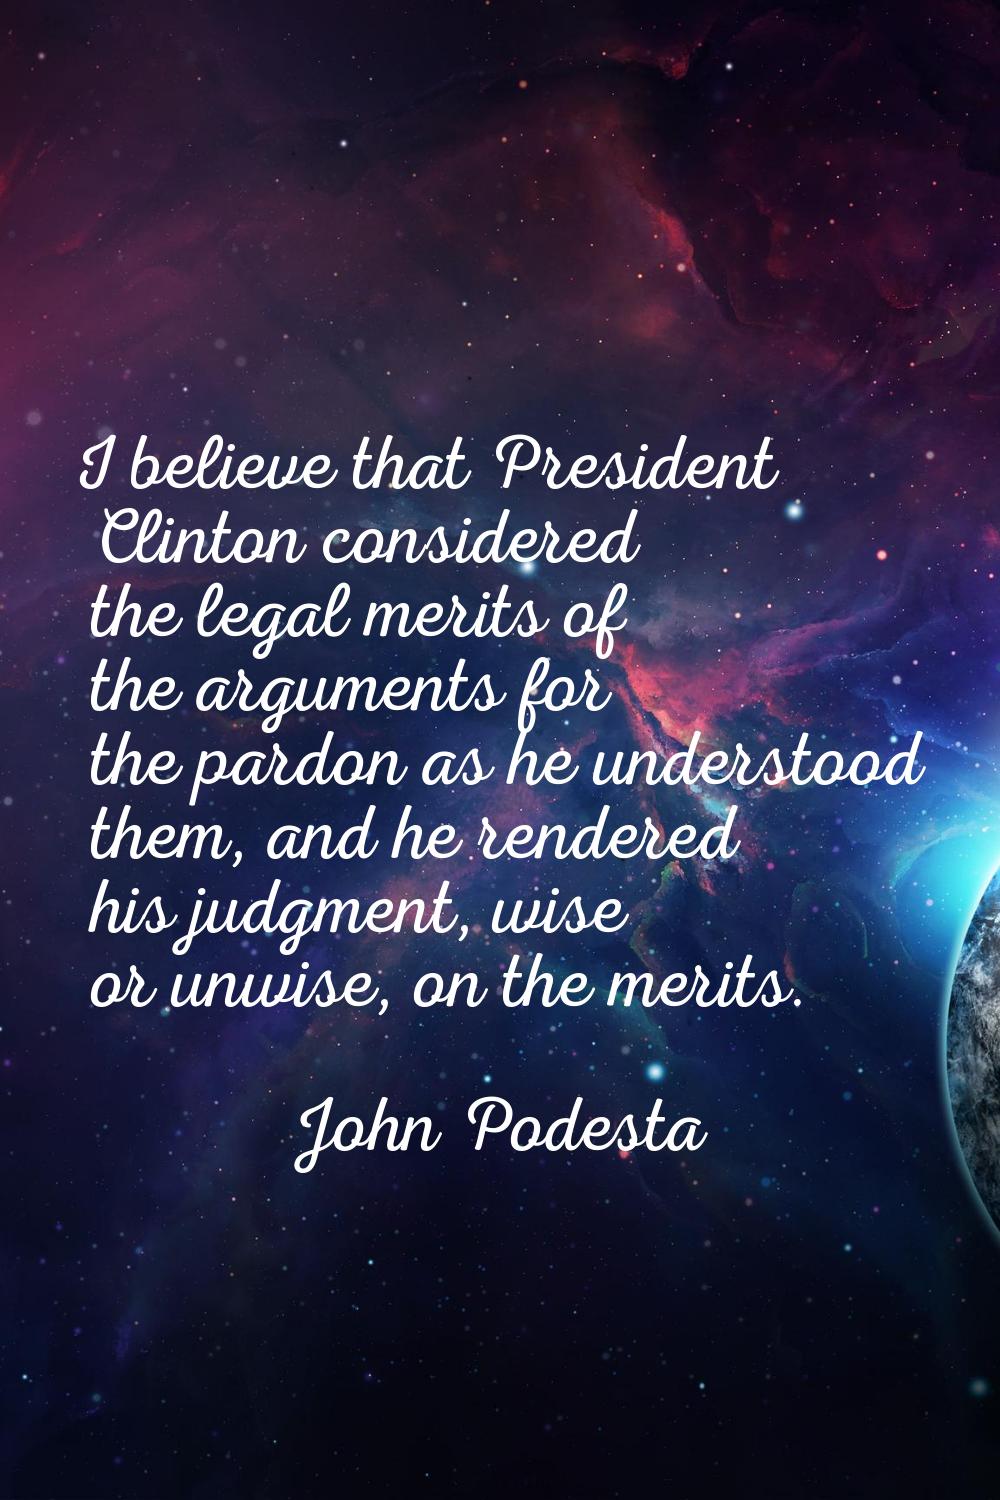 I believe that President Clinton considered the legal merits of the arguments for the pardon as he 